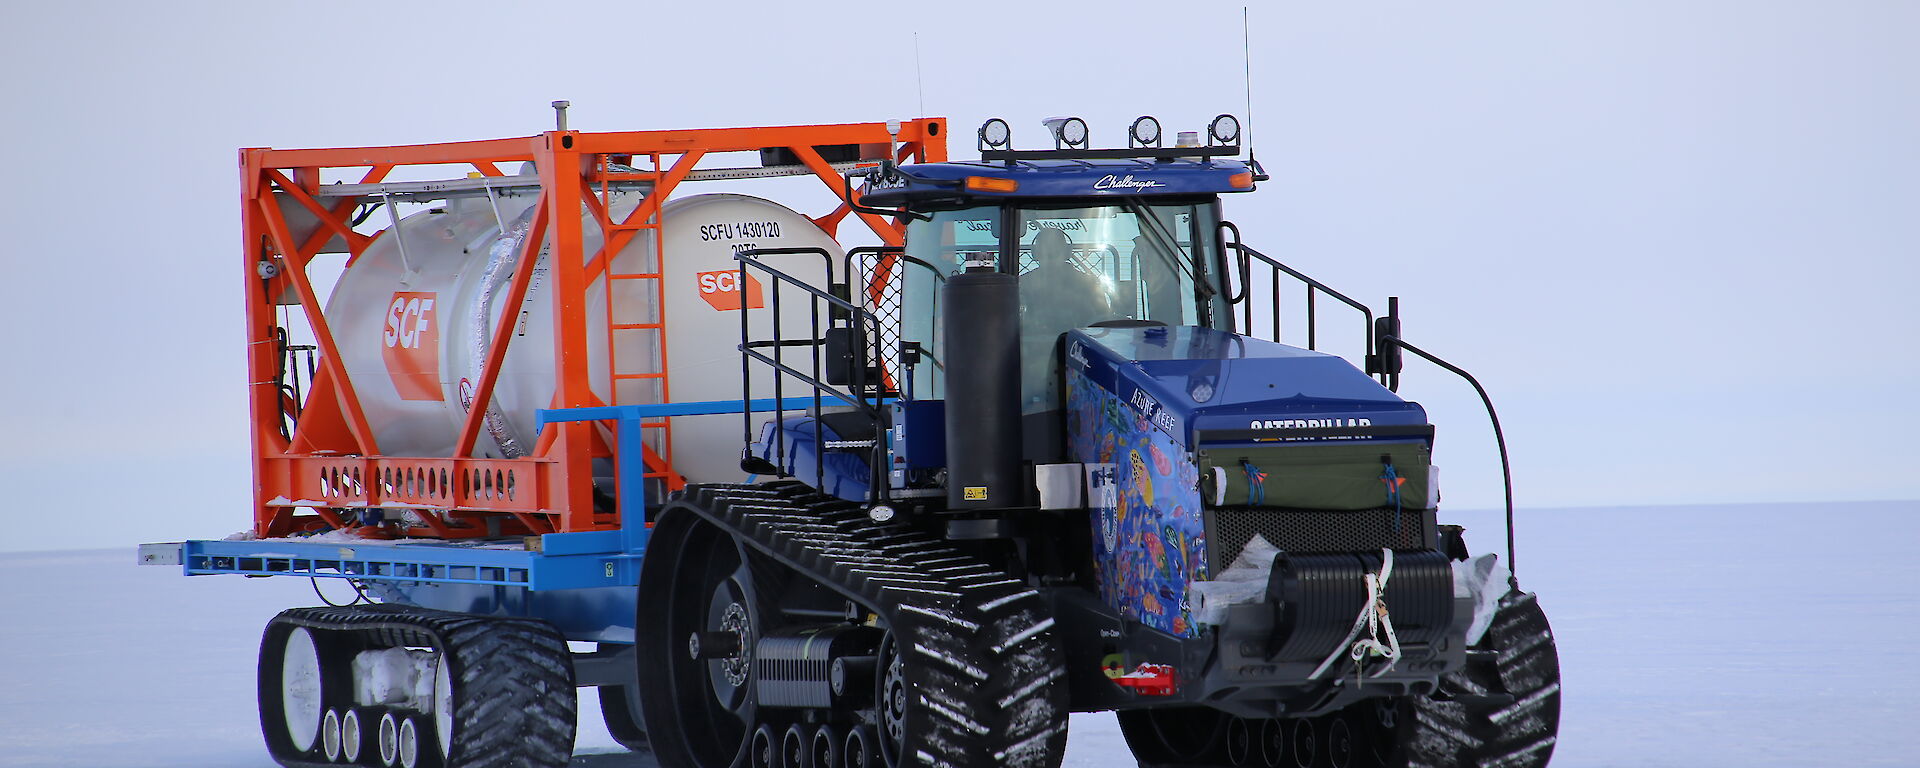 A tractor towing a fuel cylinder in Antarctica.